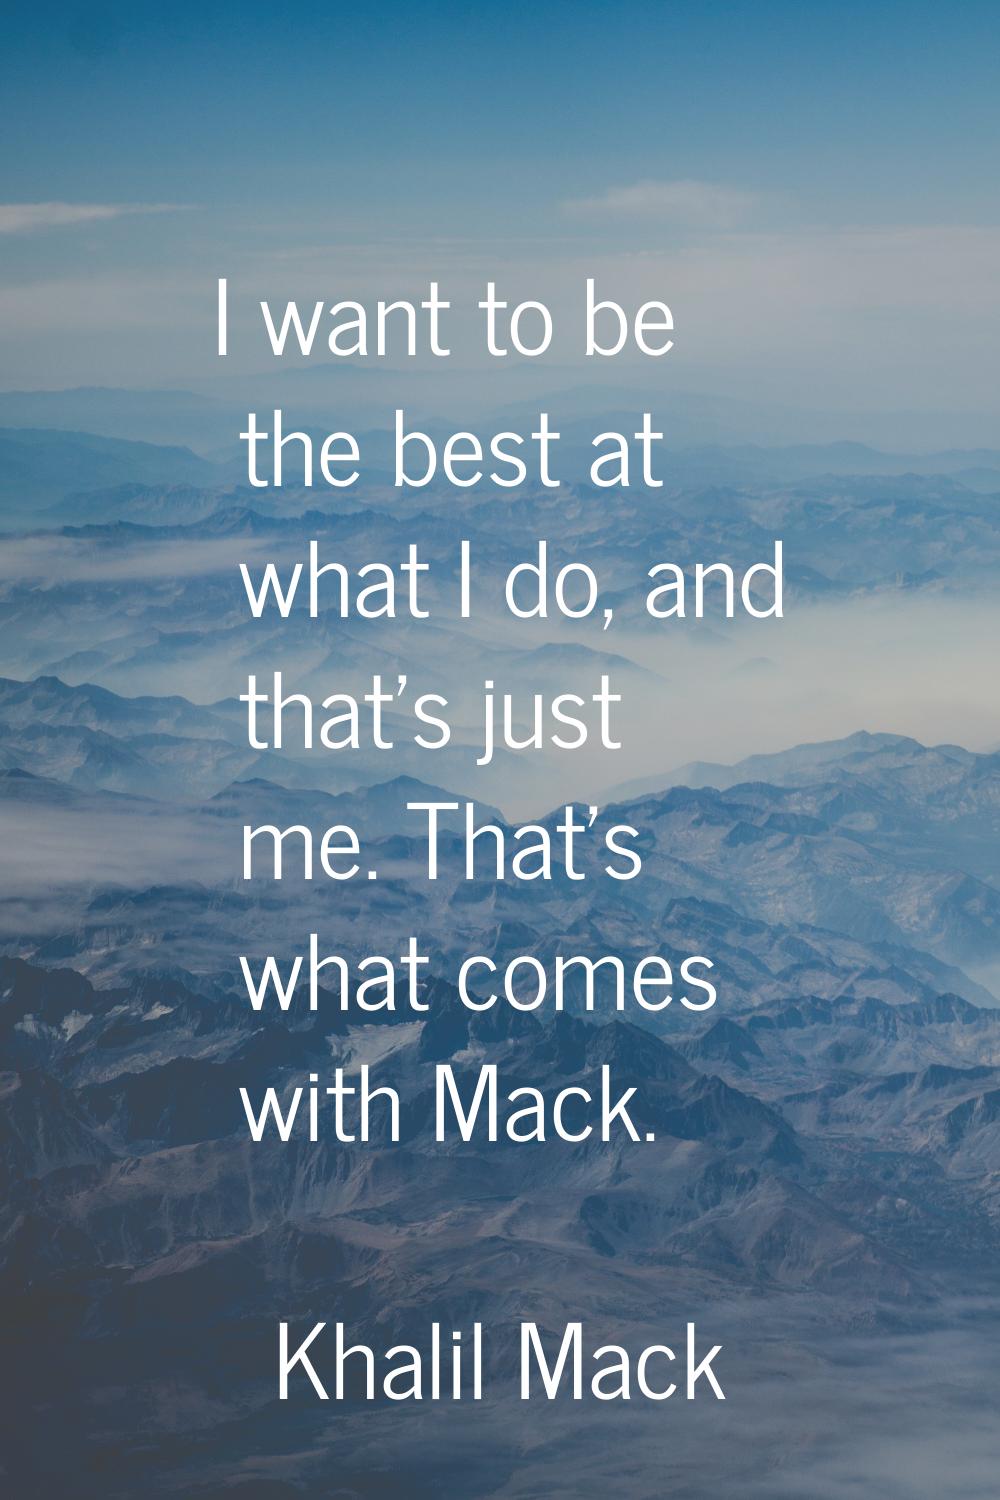 I want to be the best at what I do, and that's just me. That's what comes with Mack.